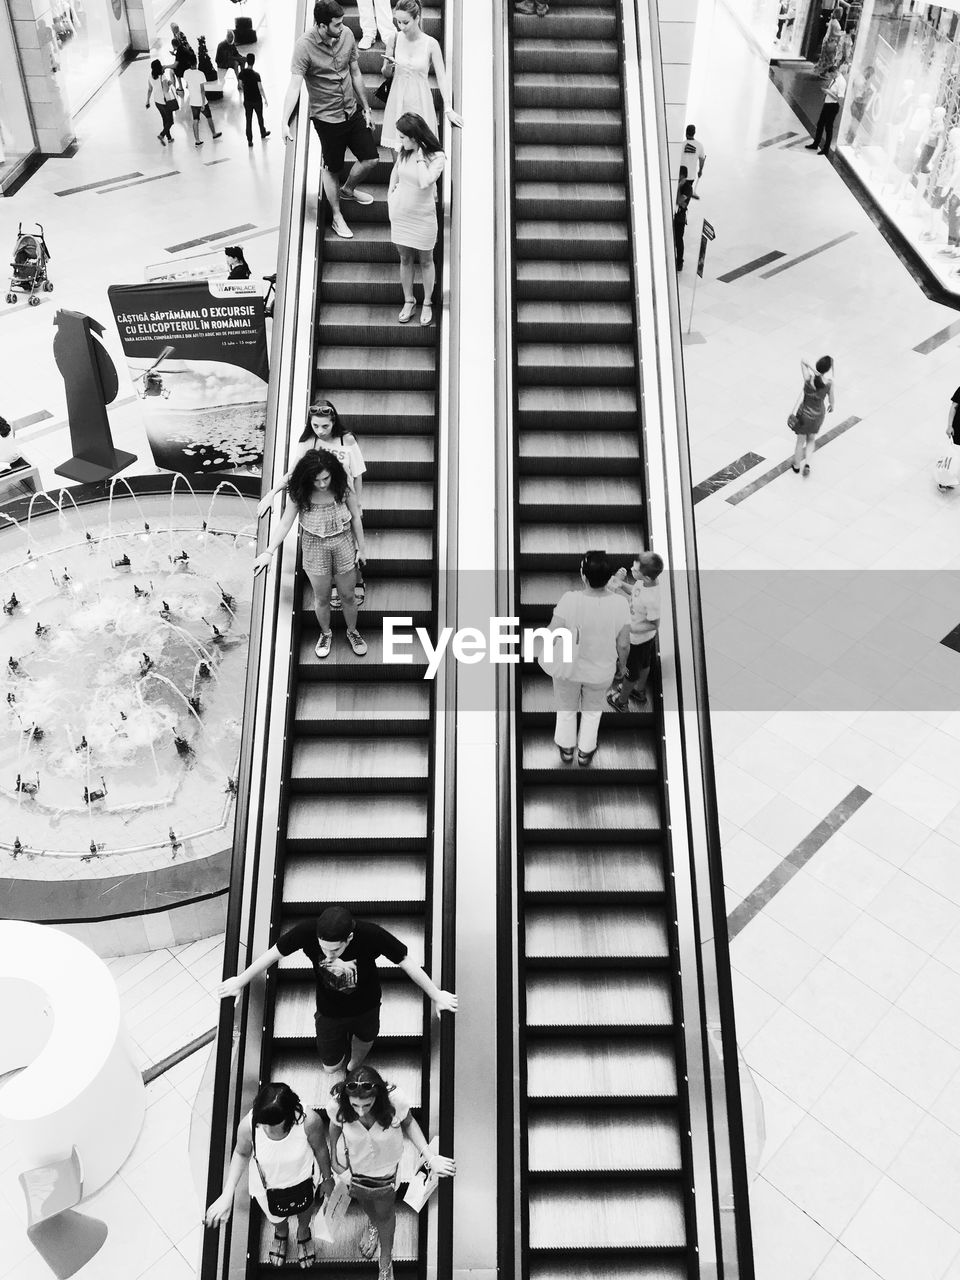 HIGH ANGLE VIEW OF PEOPLE AT ESCALATOR